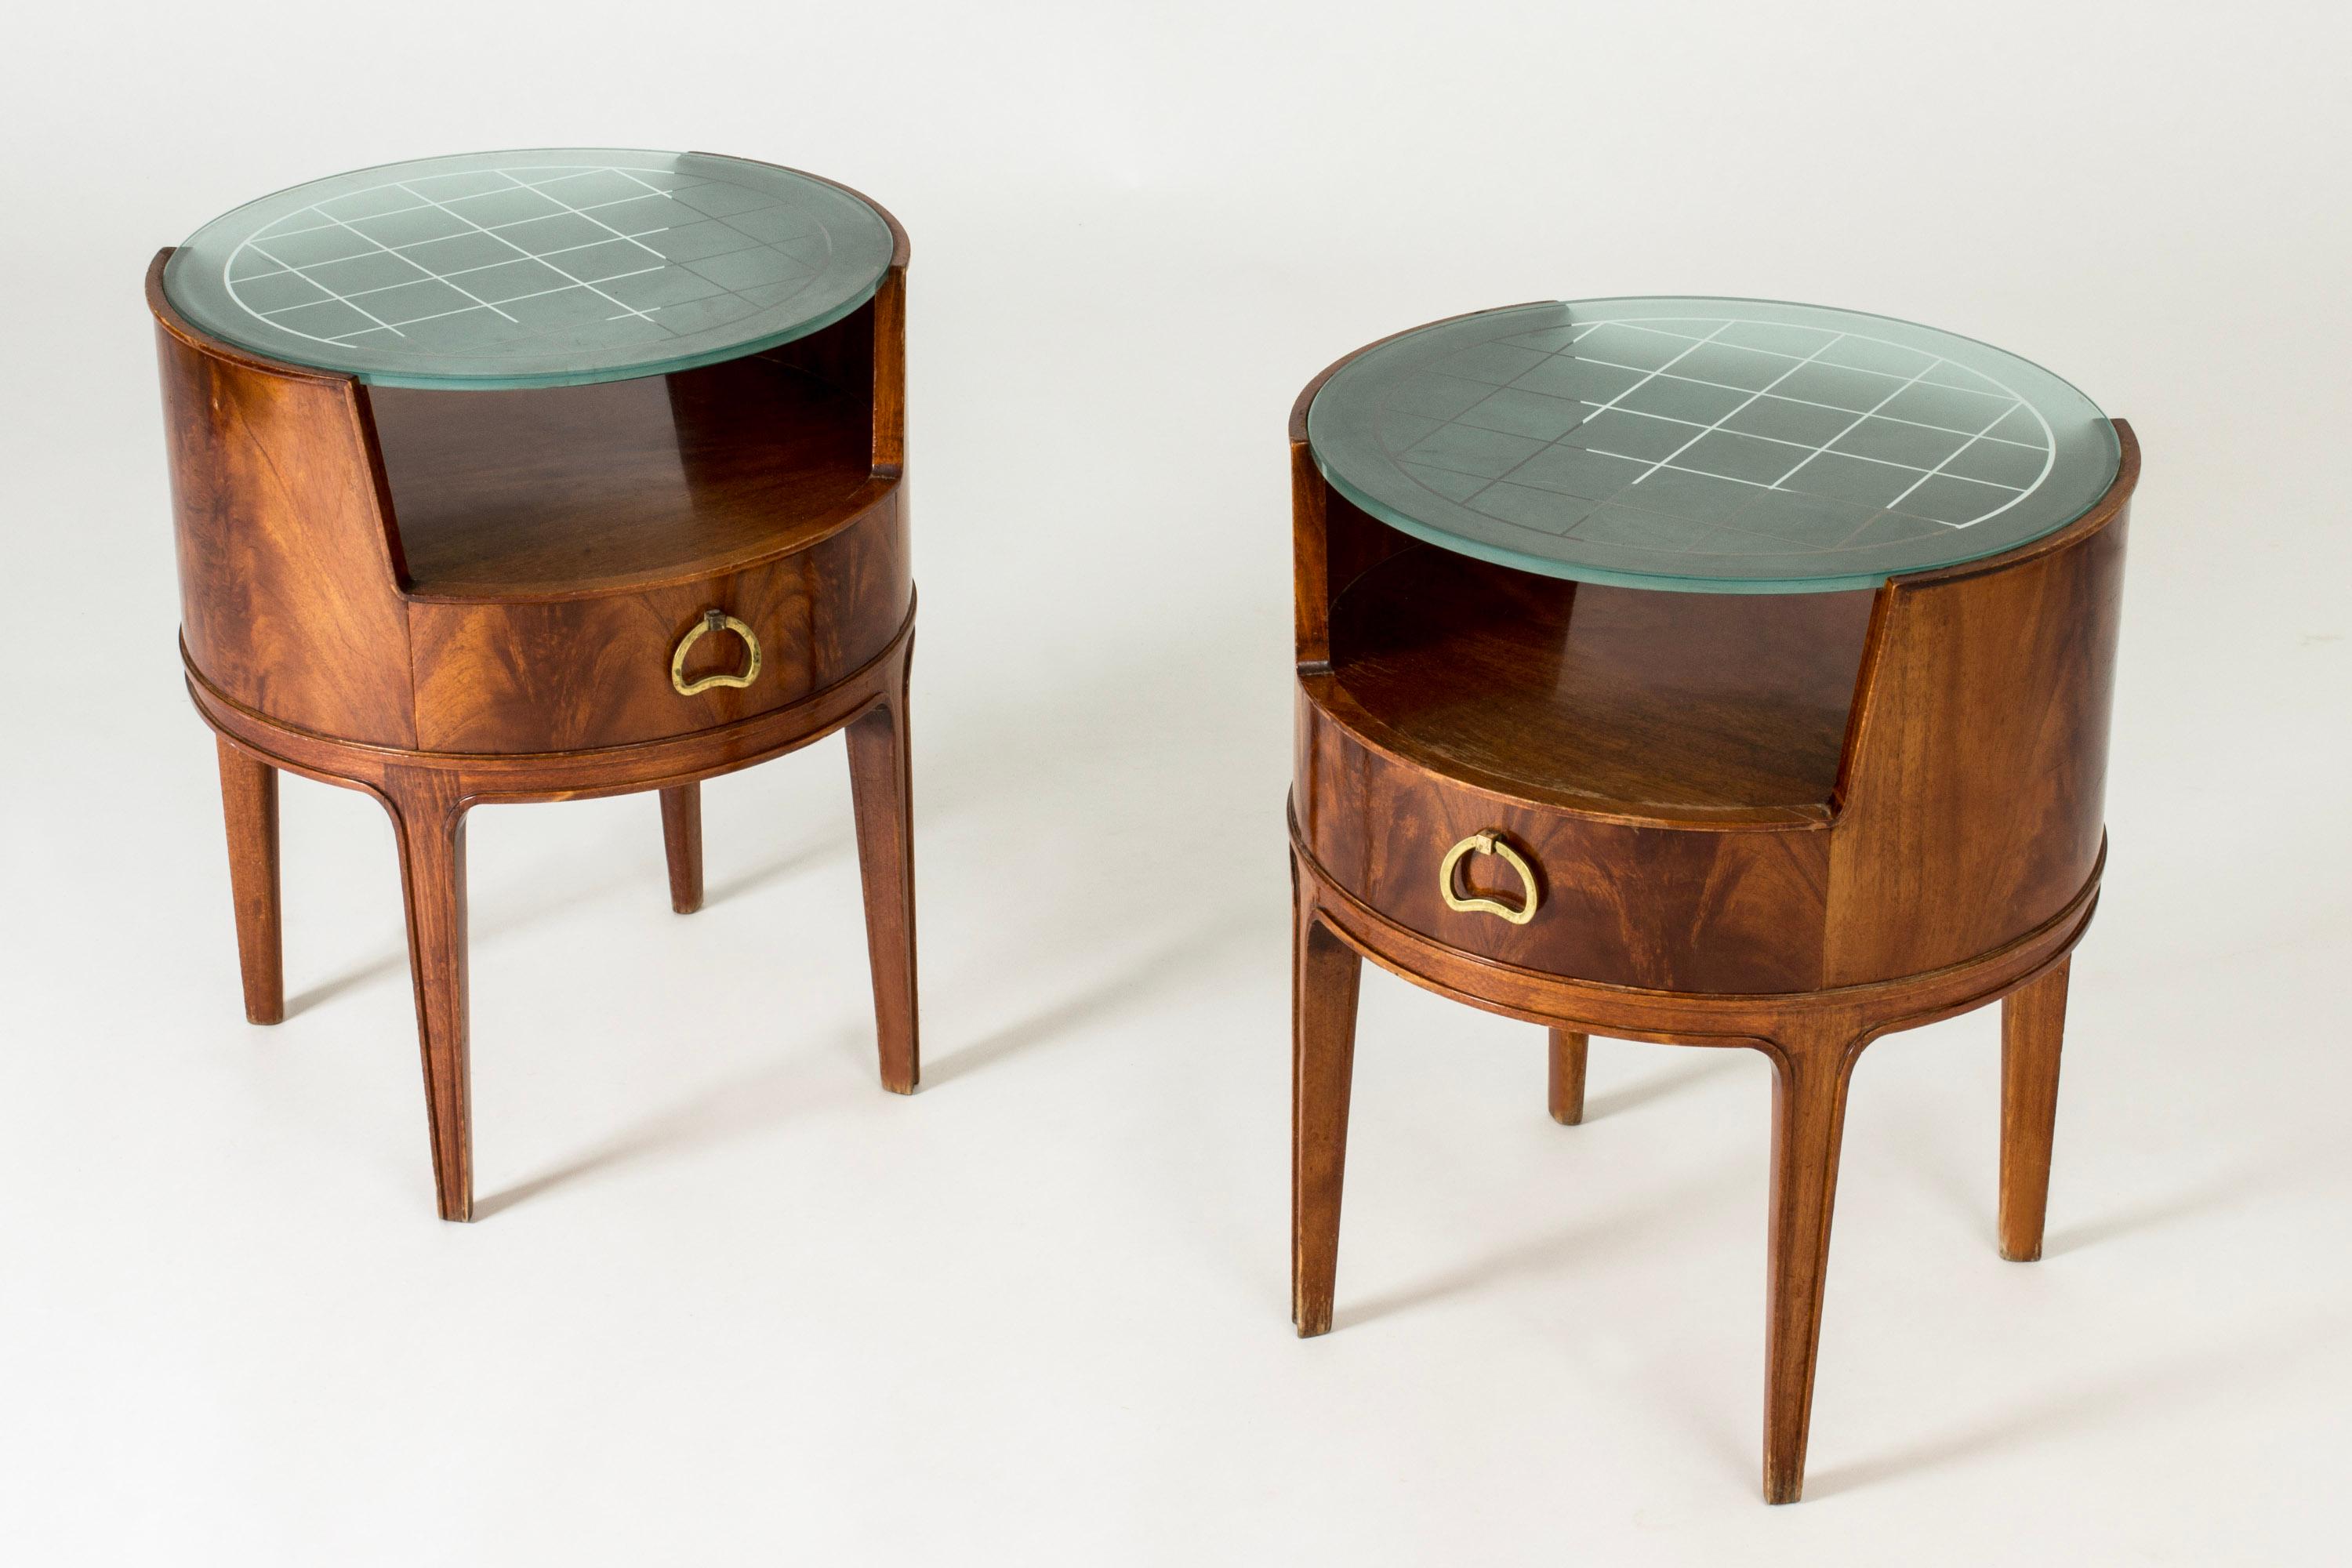 Pair of beautiful bedside tables by Axel Larsson, with pyramid mahogany veneer, frosted glass tops and sculpted brass handles. The glass tops have an etched checkered pattern.